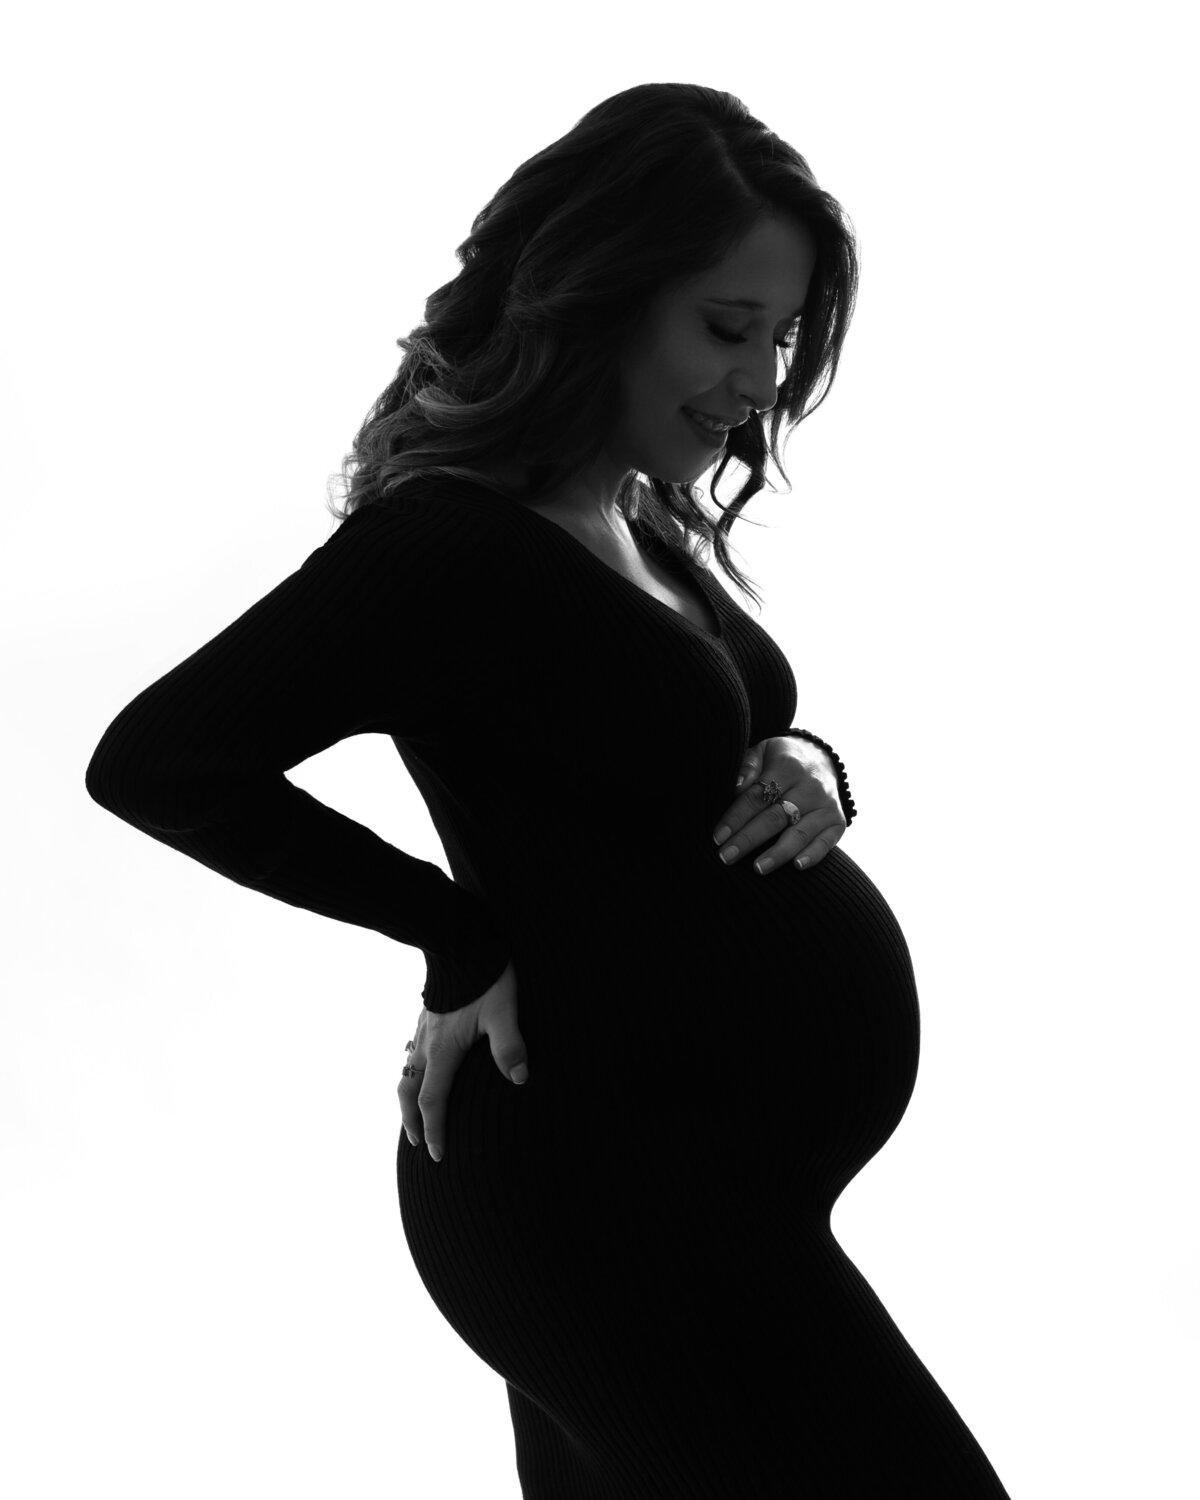 Silhouette black and white maternity portrait by Daisy Rey Photography in New Jersey studio